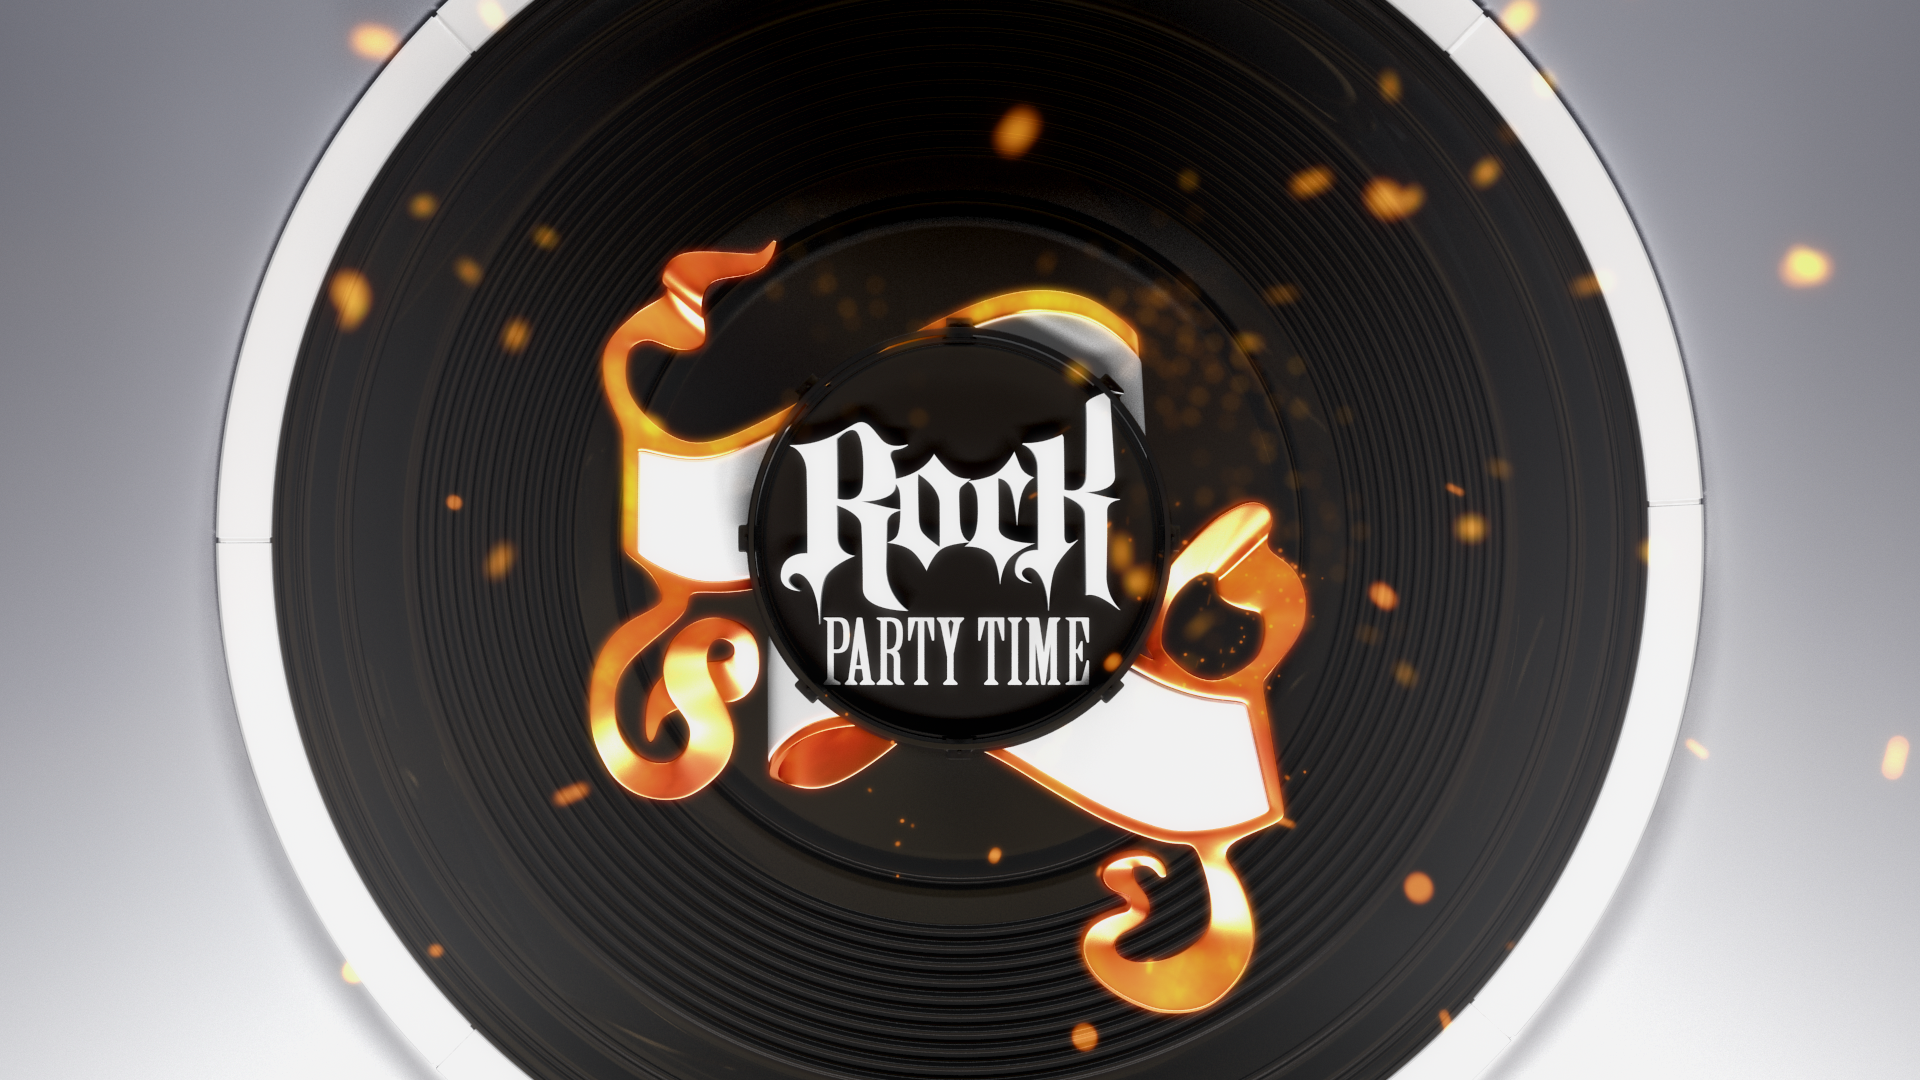 ROCK PARTY TIME